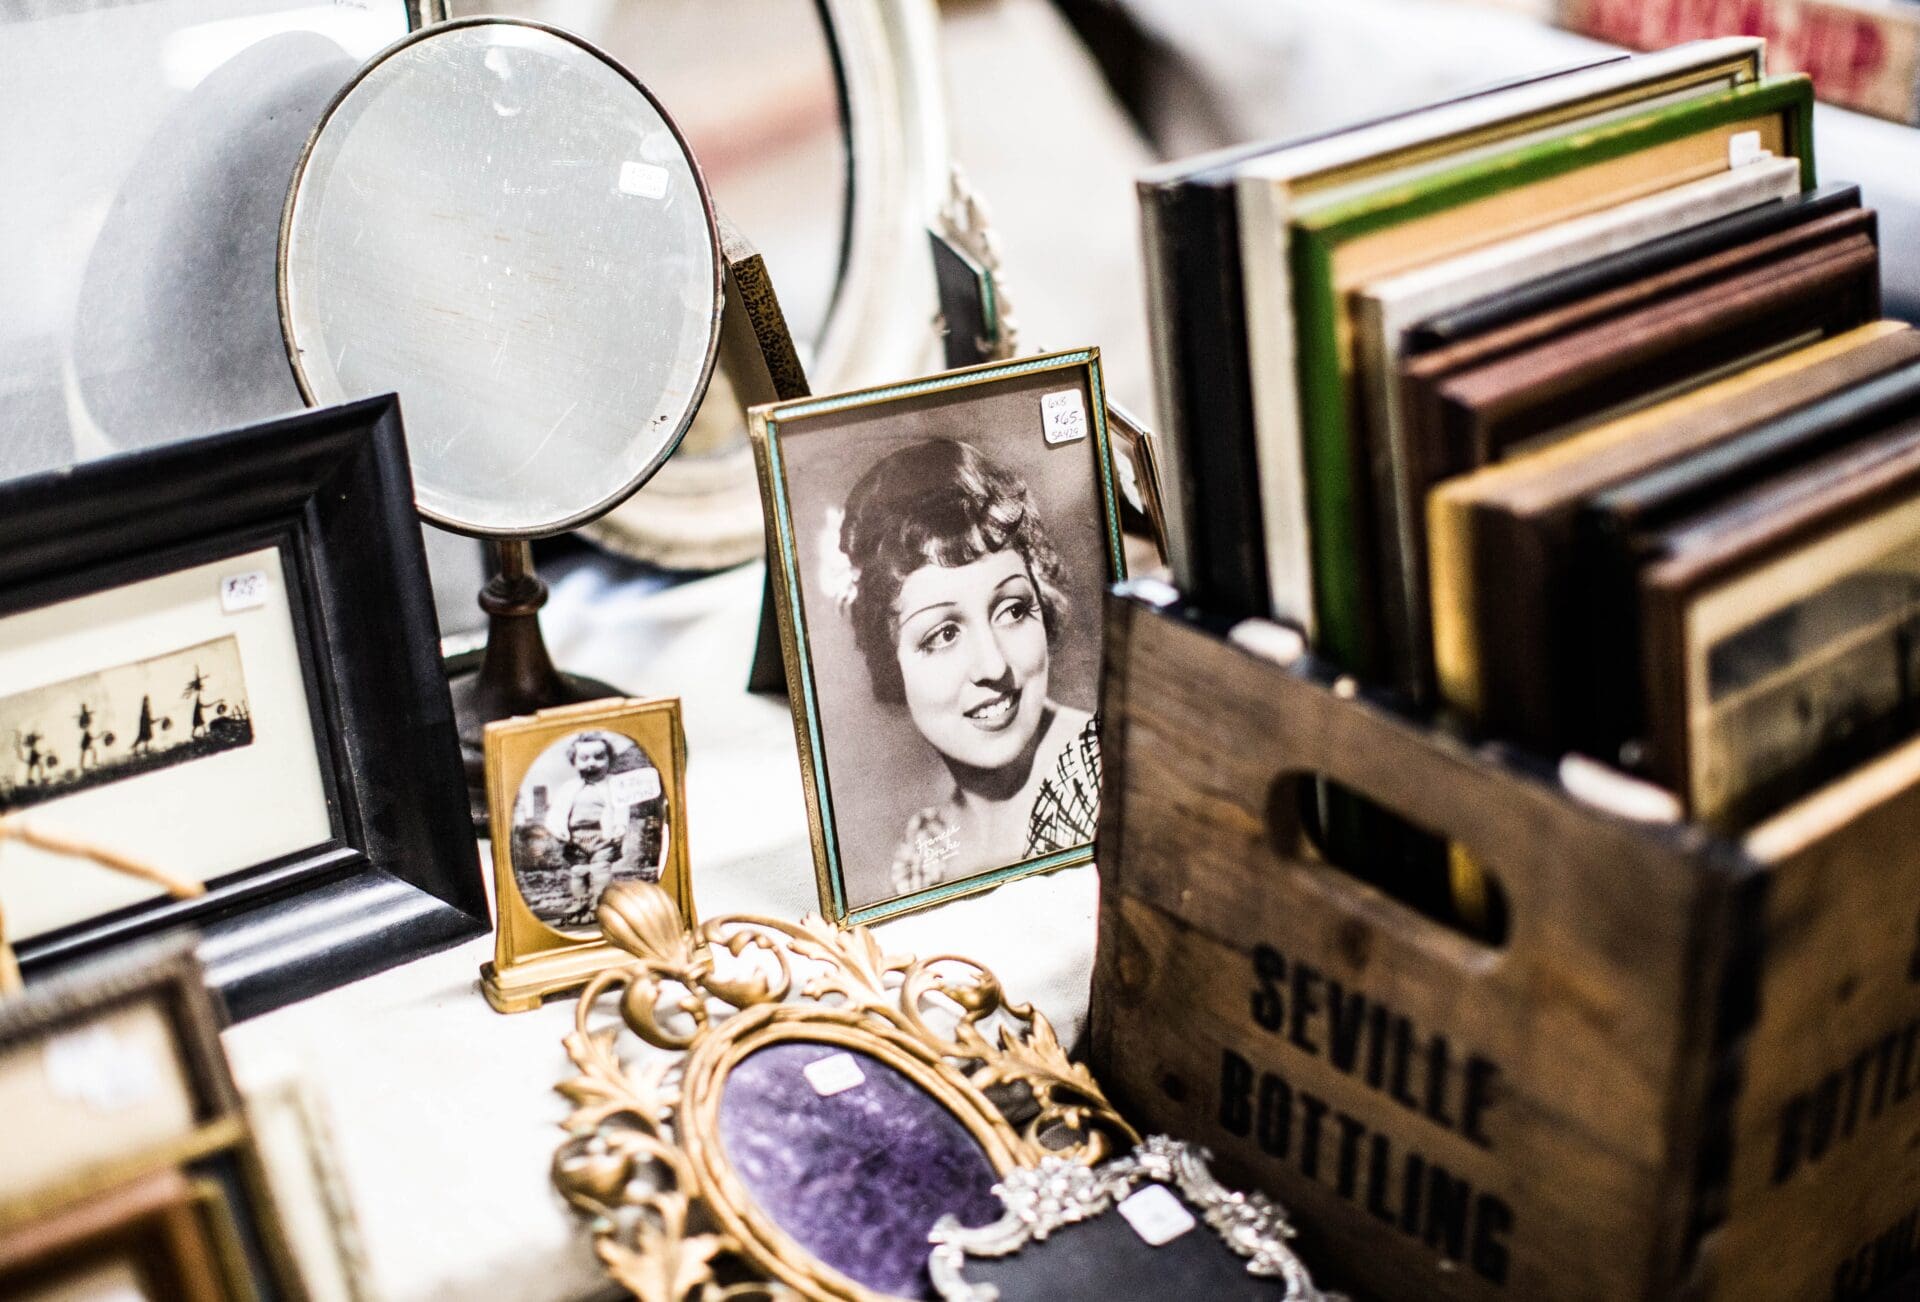 Is the hidden gem dead? A black and while photo and a cardboard box filled with photo frames at a flea market stall